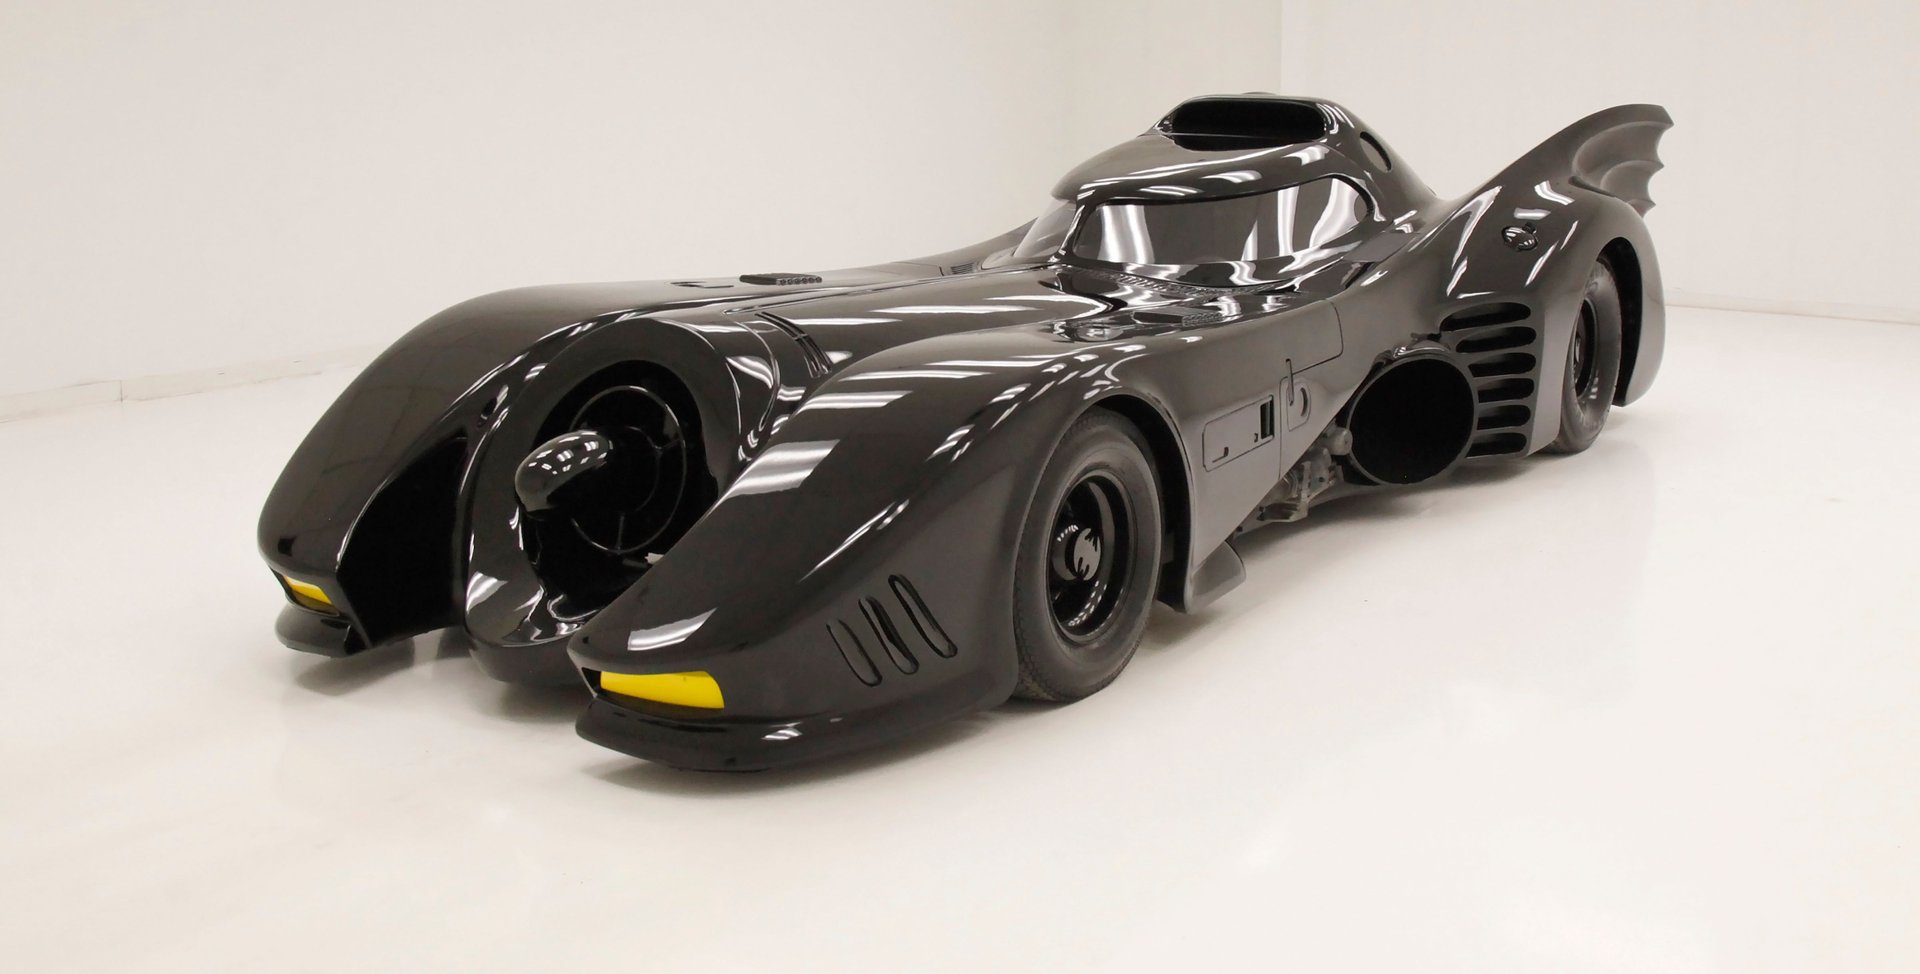 Batmobile for sale for one and a half million